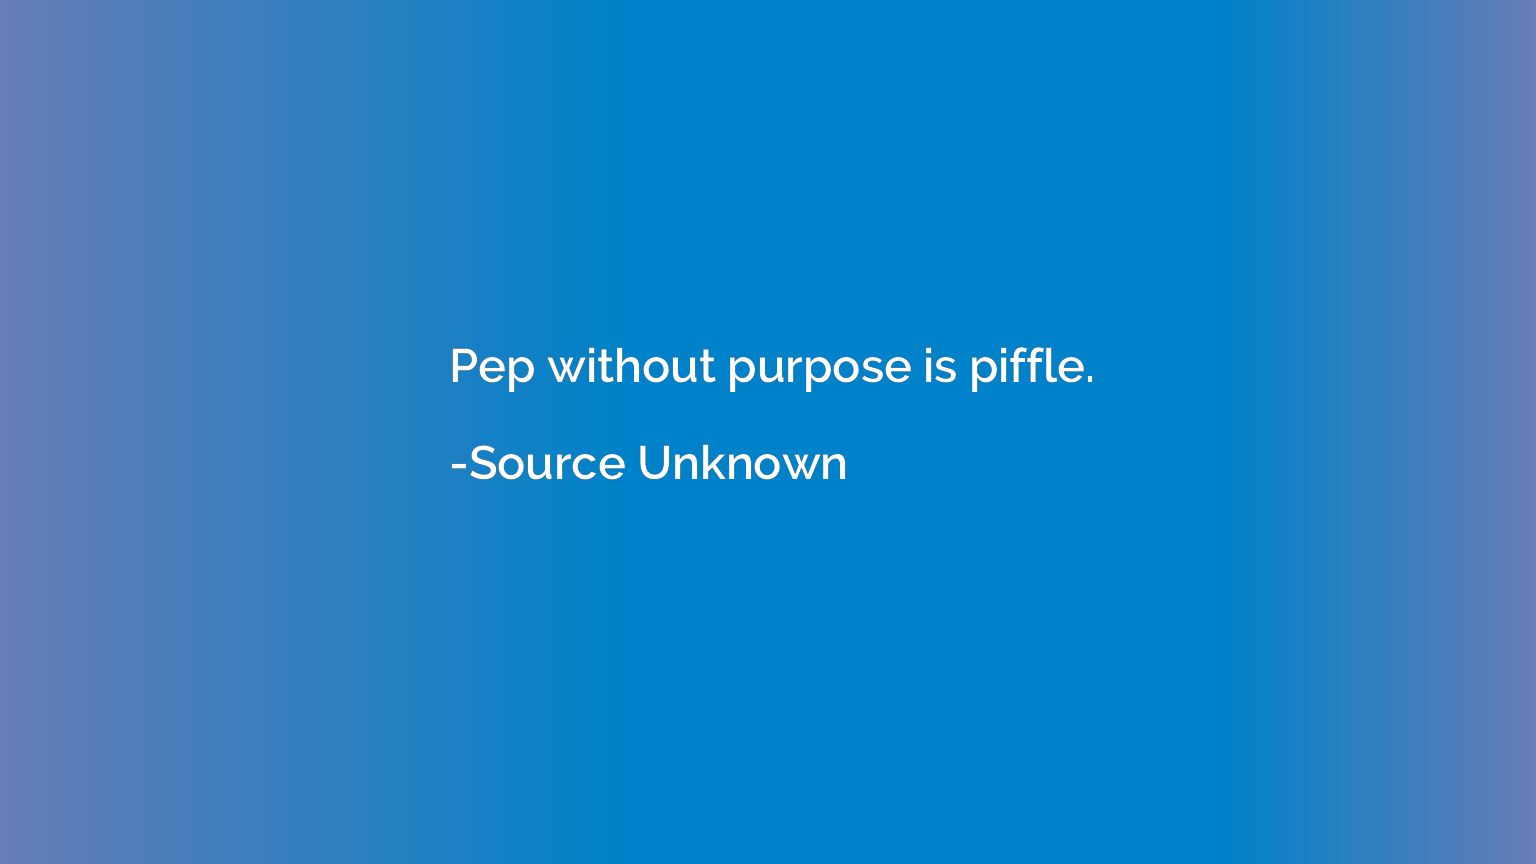 Pep without purpose is piffle.